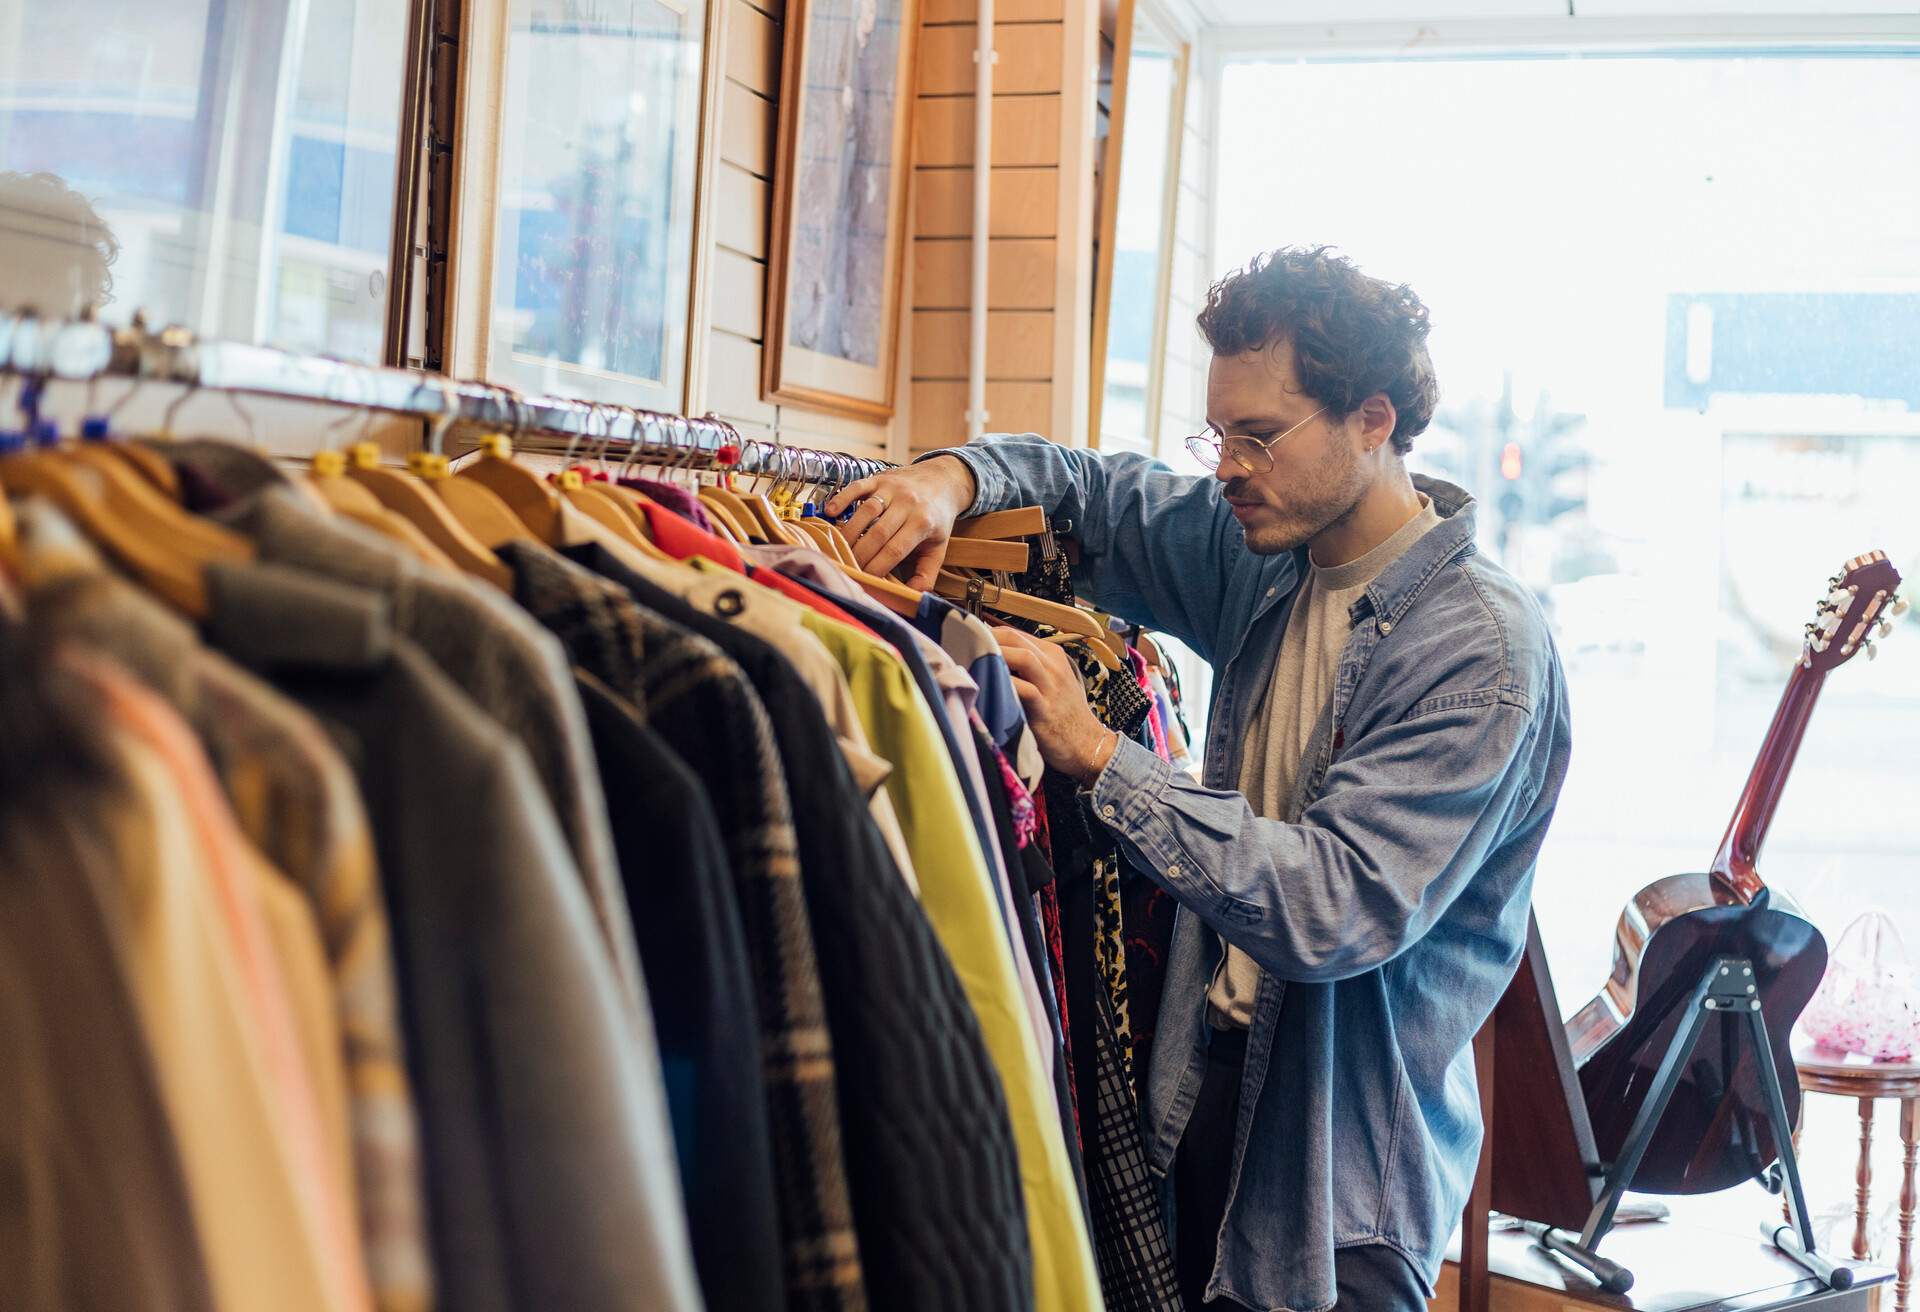 THEME_VINTAGE_SHOPPING_PEOPLE_MAN_GettyImages-1217805751